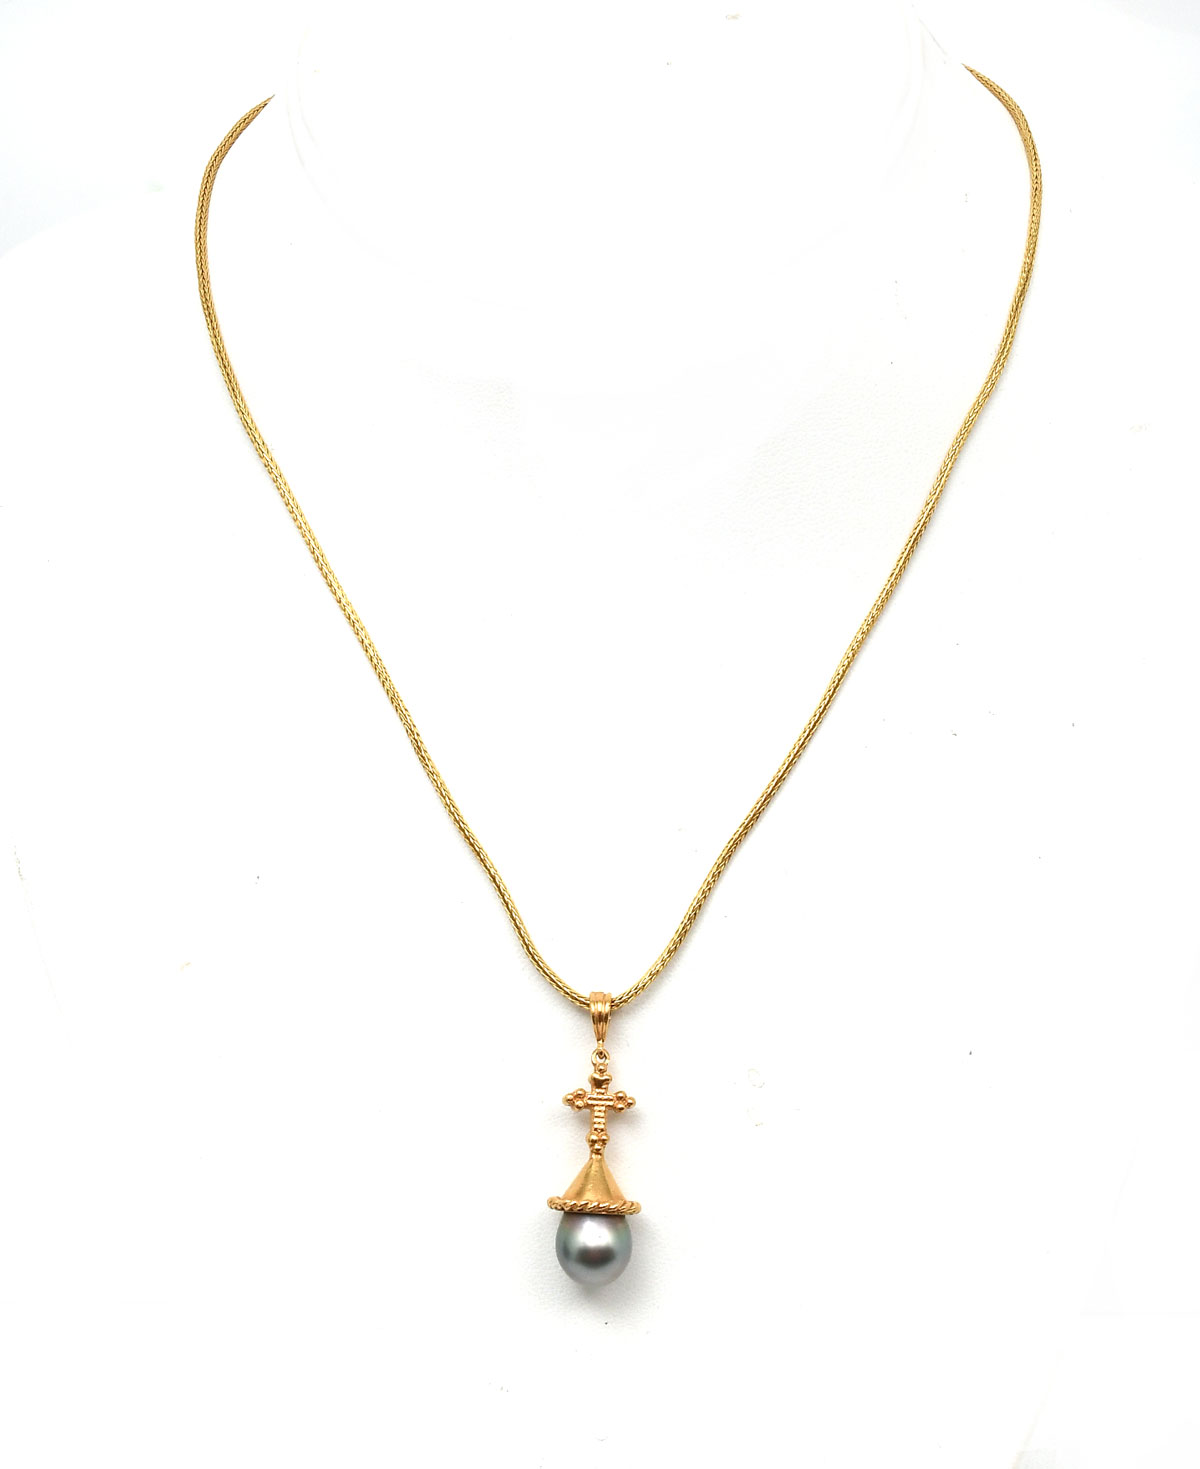 22K GREY PEARL ETRUSCAN STYLE NECKLACE: